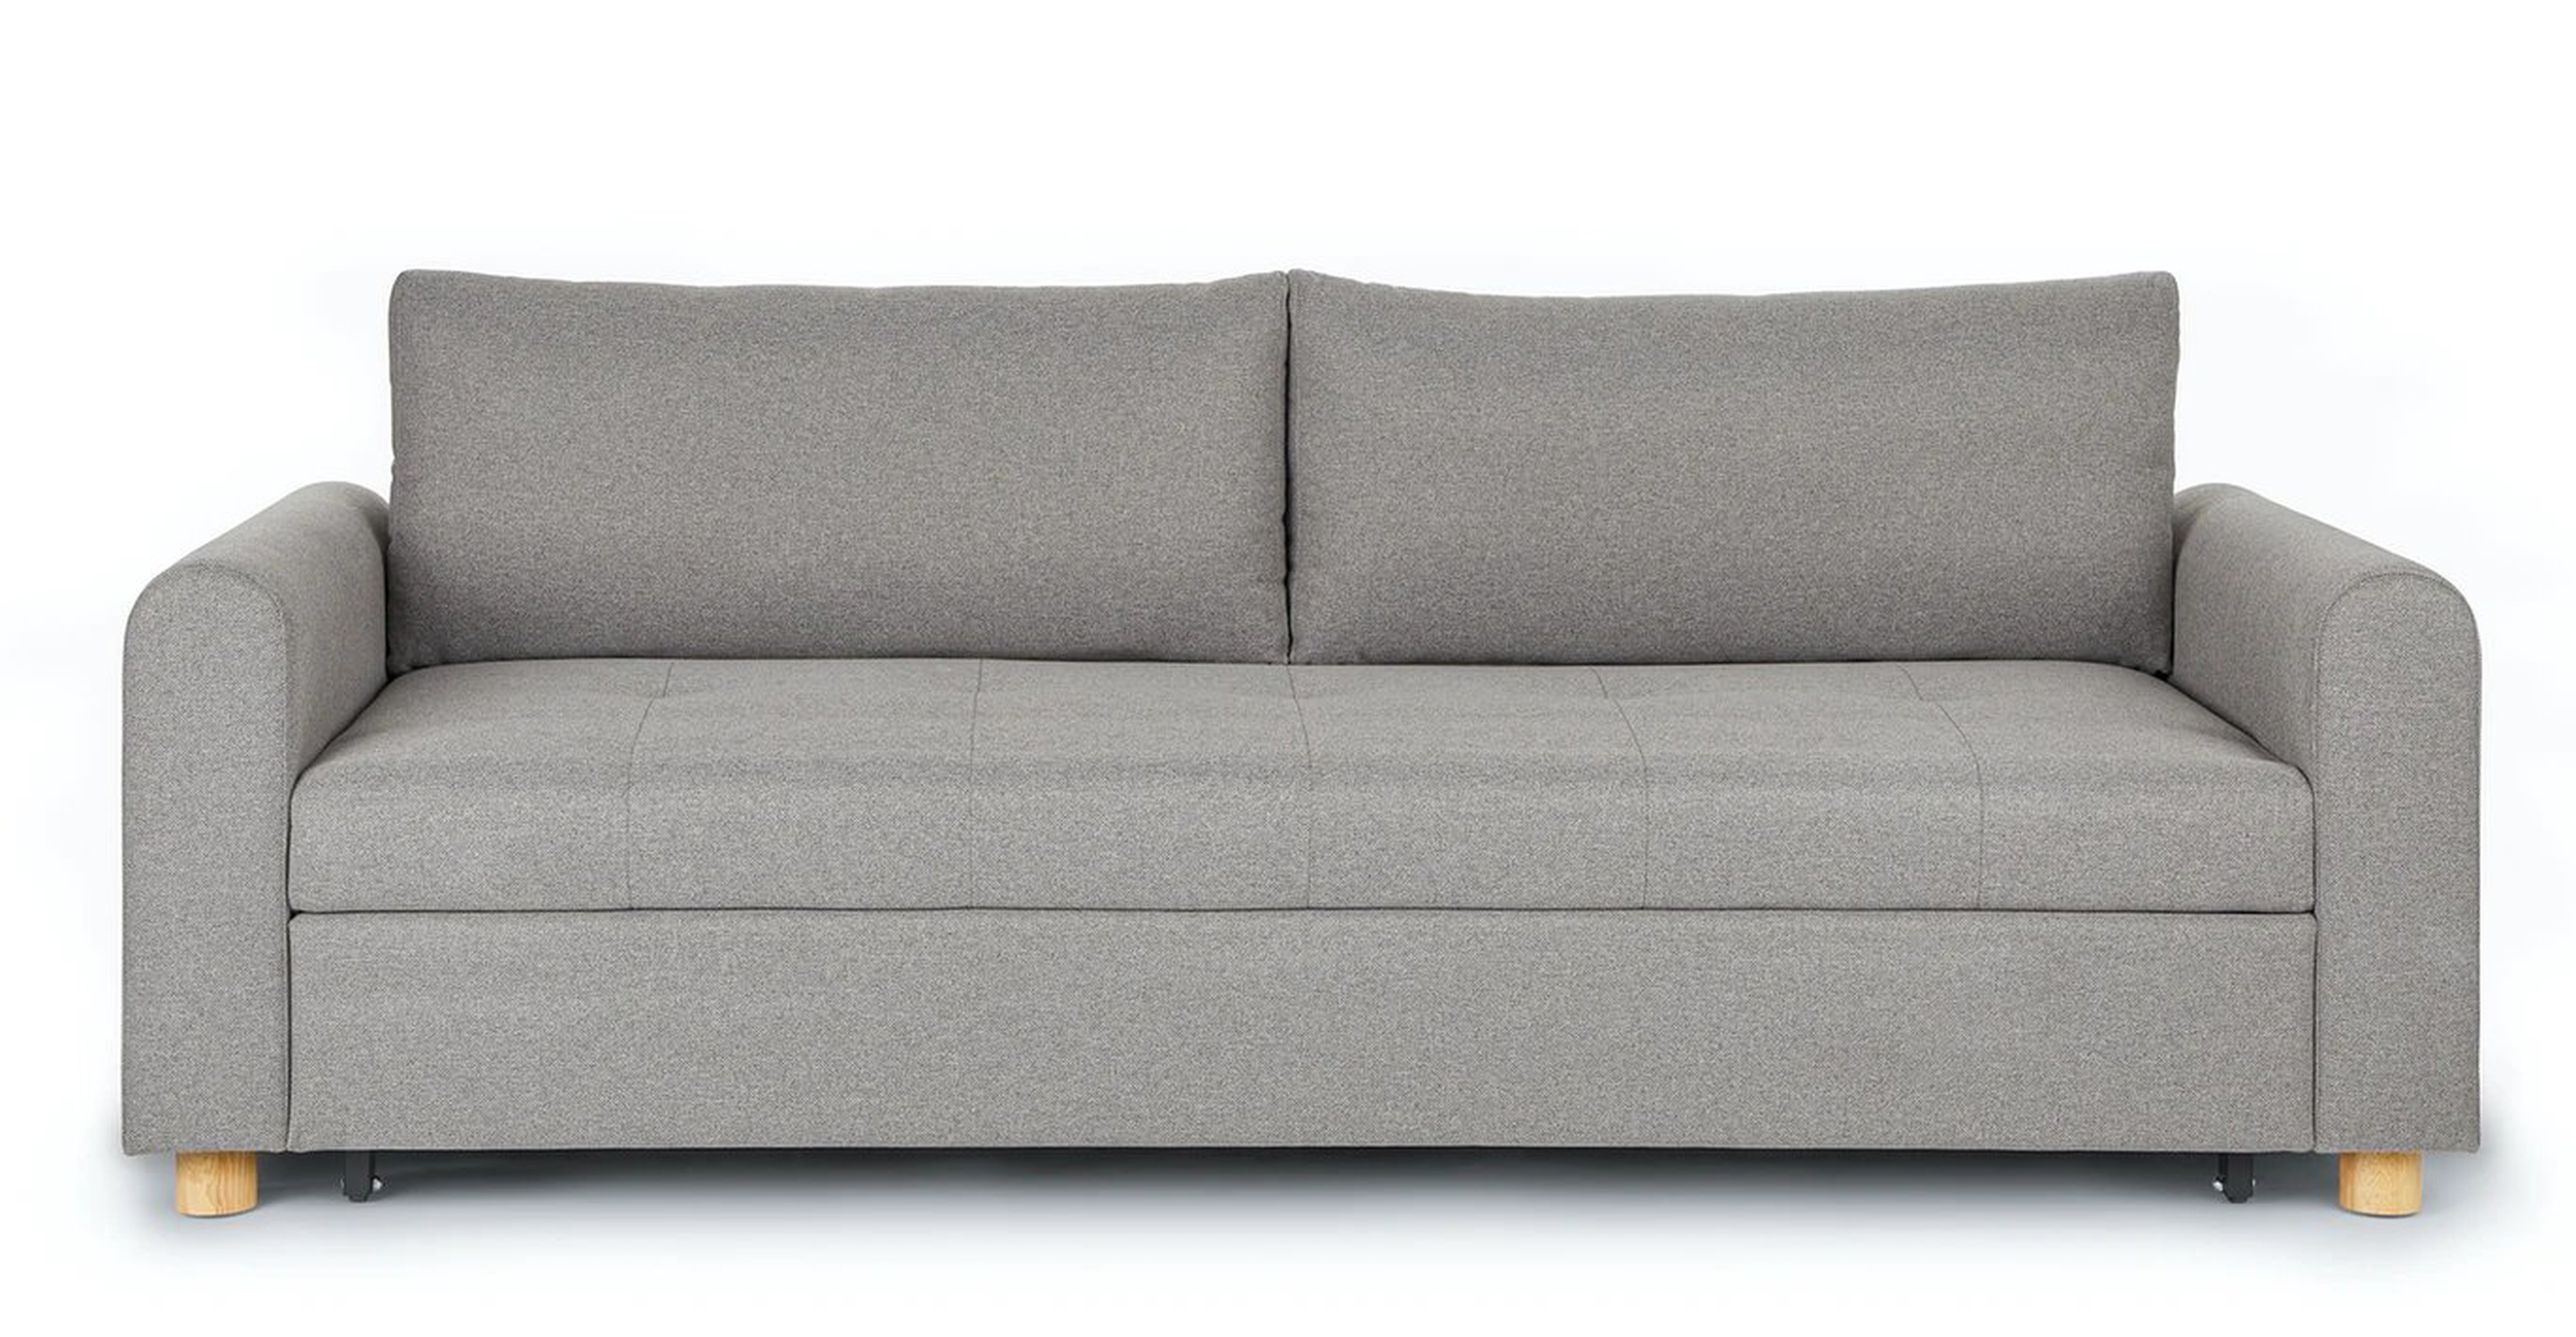 Nordby Pep Gray Sofa Bed - Article